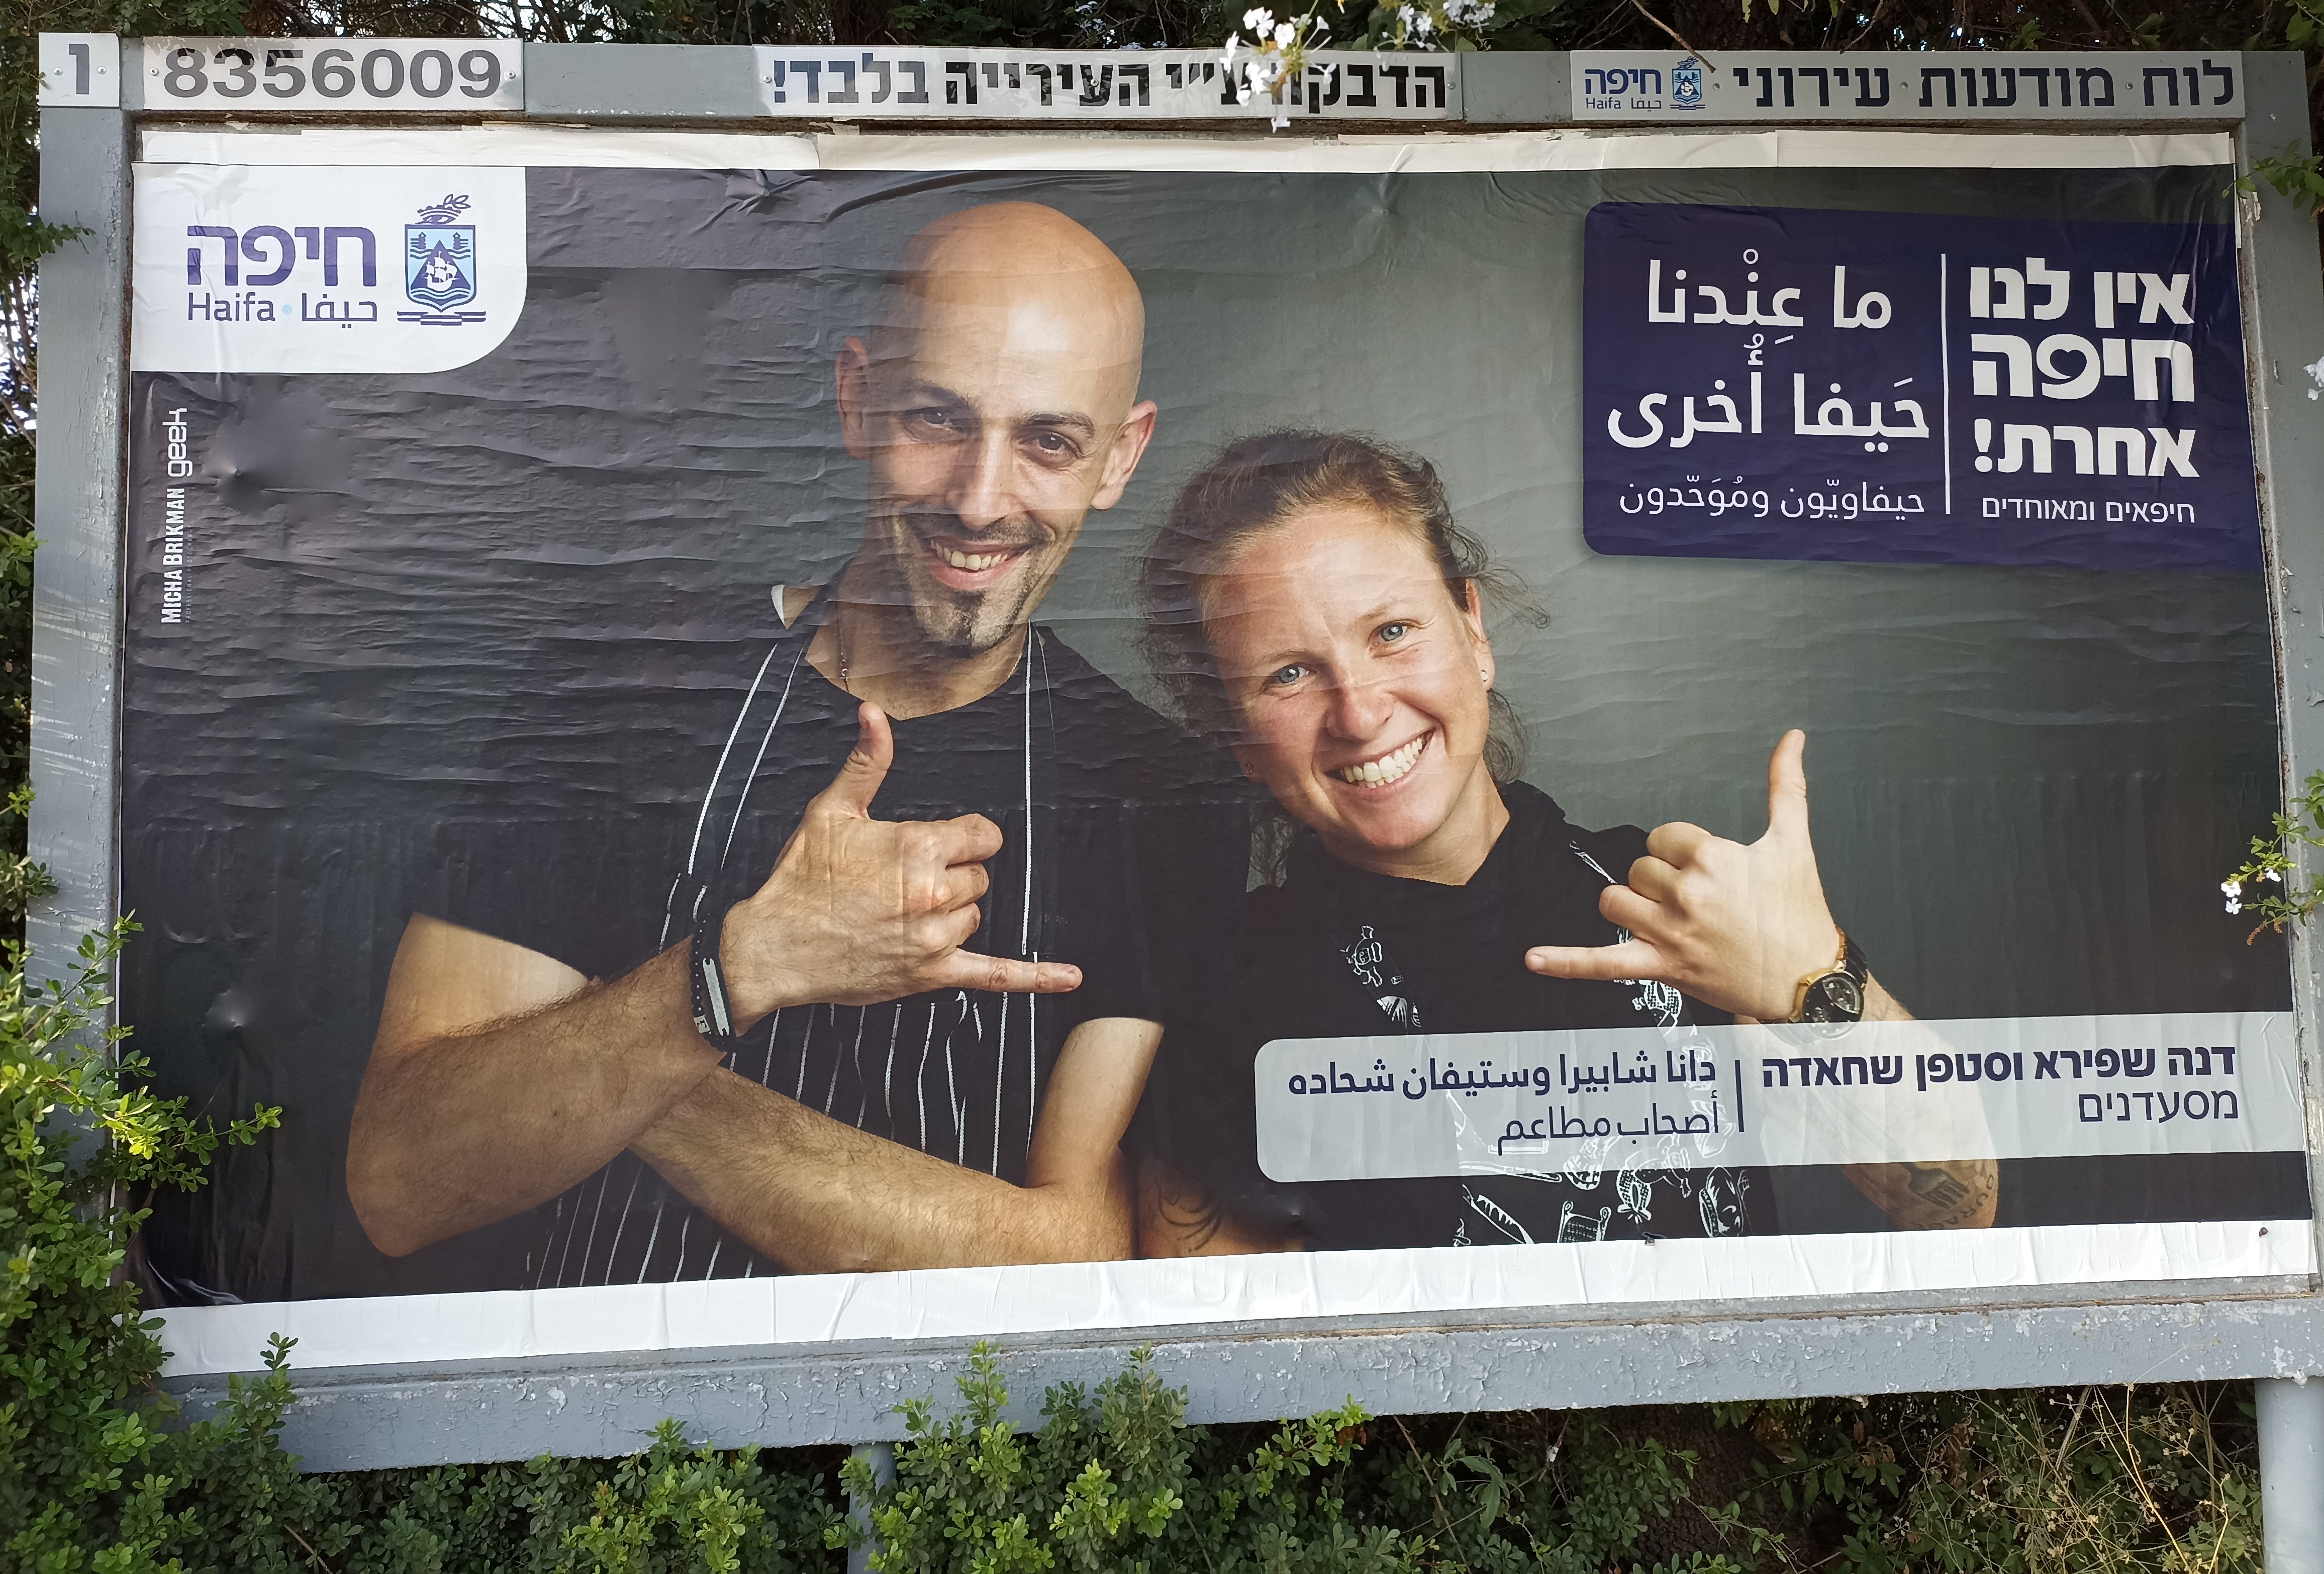 Haifa United poster campaign: “We have no other Haifa! – Haifans United”. A local billboard campaign in Haifa featuring Jewish and Arab residents, launched in May 2021 as an immediate response by the municipality to the violence (photo: Noam Yatsiv)